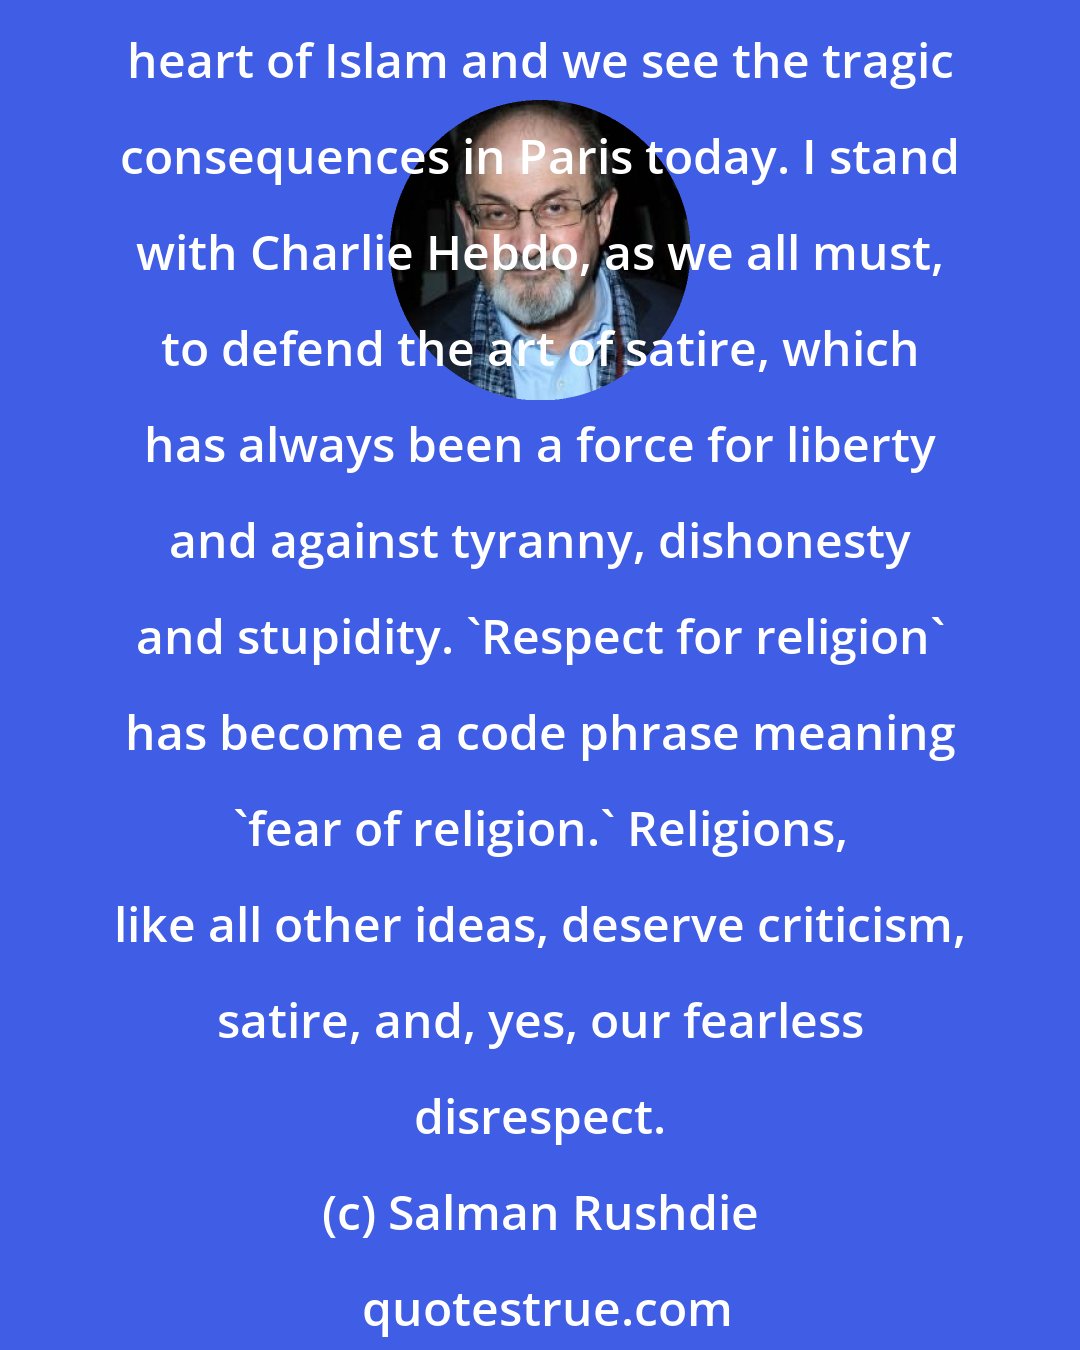 Salman Rushdie: Religion, a mediaeval form of unreason, when combined with modern weaponry becomes a real threat to our freedoms. This religious totalitarianism has caused a deadly mutation in the heart of Islam and we see the tragic consequences in Paris today. I stand with Charlie Hebdo, as we all must, to defend the art of satire, which has always been a force for liberty and against tyranny, dishonesty and stupidity. 'Respect for religion' has become a code phrase meaning 'fear of religion.' Religions, like all other ideas, deserve criticism, satire, and, yes, our fearless disrespect.